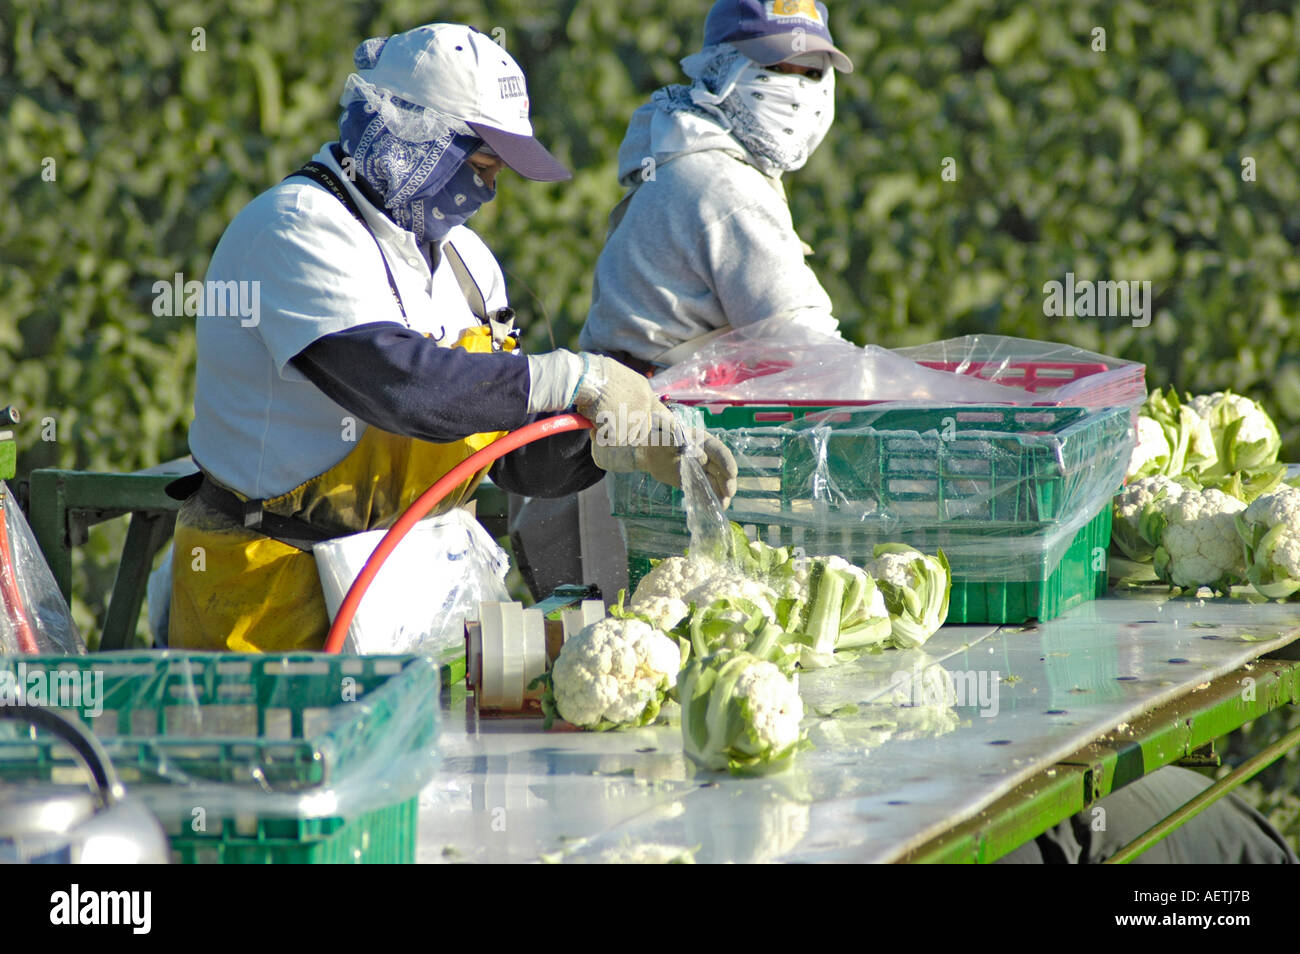 Cauliflower field packing cleaning cutting in Santa Maria California USA America fields by real illegal Latins Mexicans immigrants central America Stock Photo